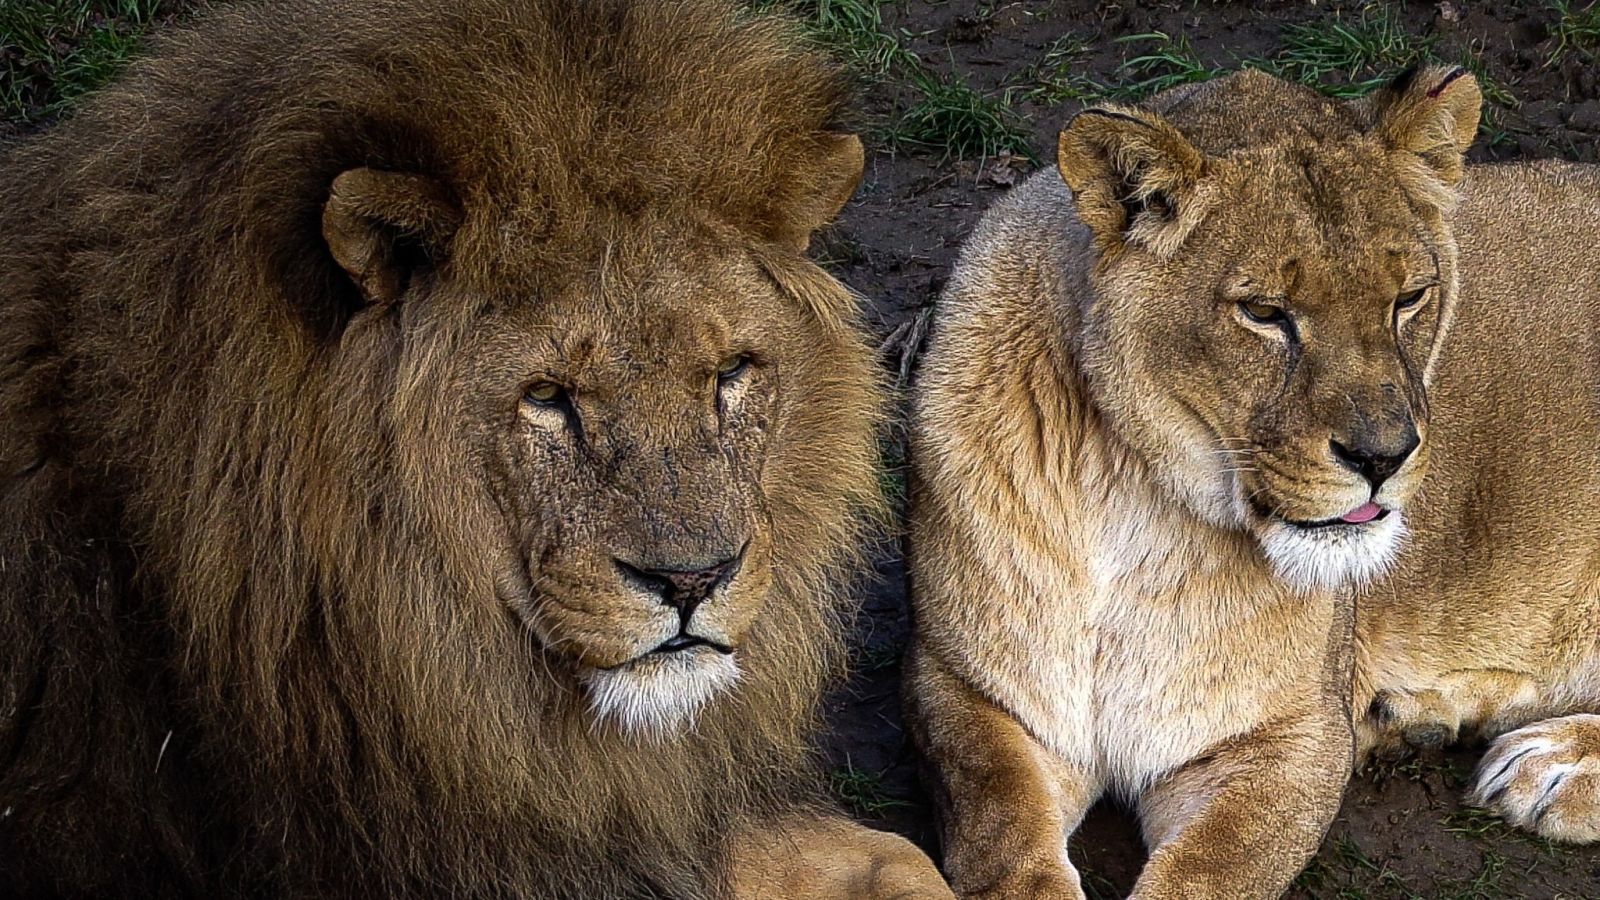 Faulty Lion matches are likely fake or because of alien tree laws - but we  found several duds